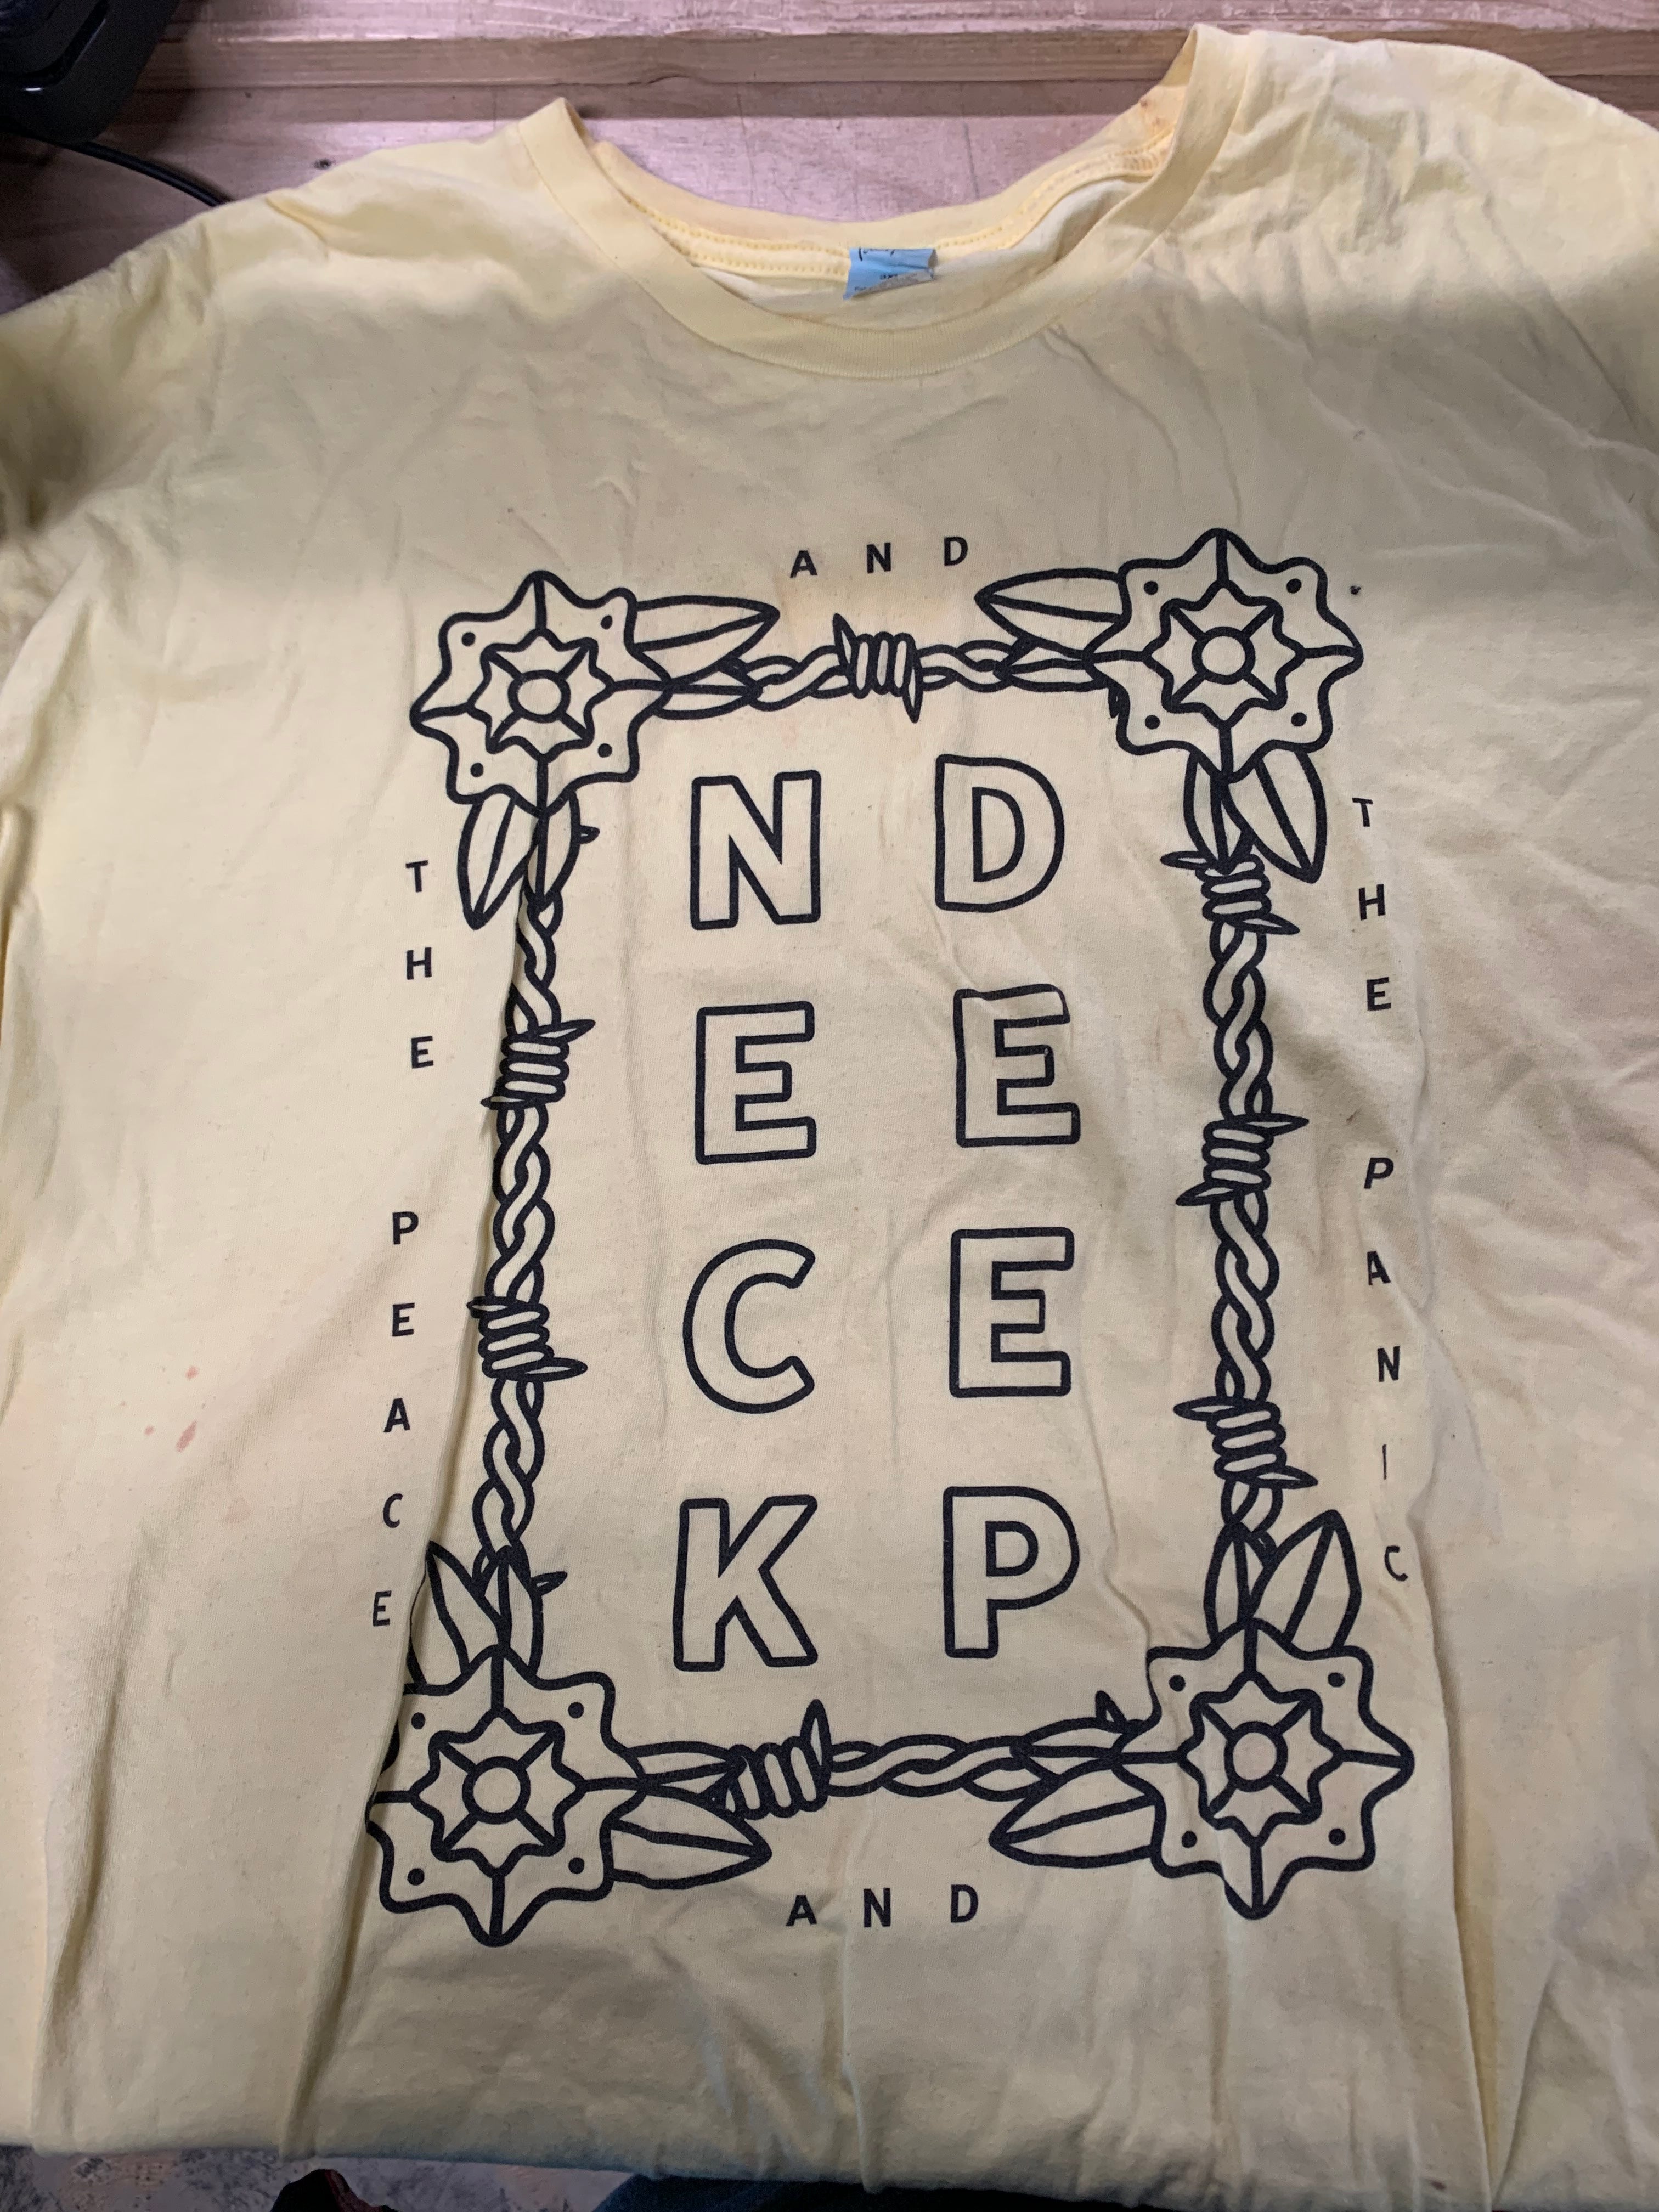 Neck Deep The Peace And The Panic T-Shirt, Yellow W/ Minor Staining (SEE DESCRIPTION), 3XL